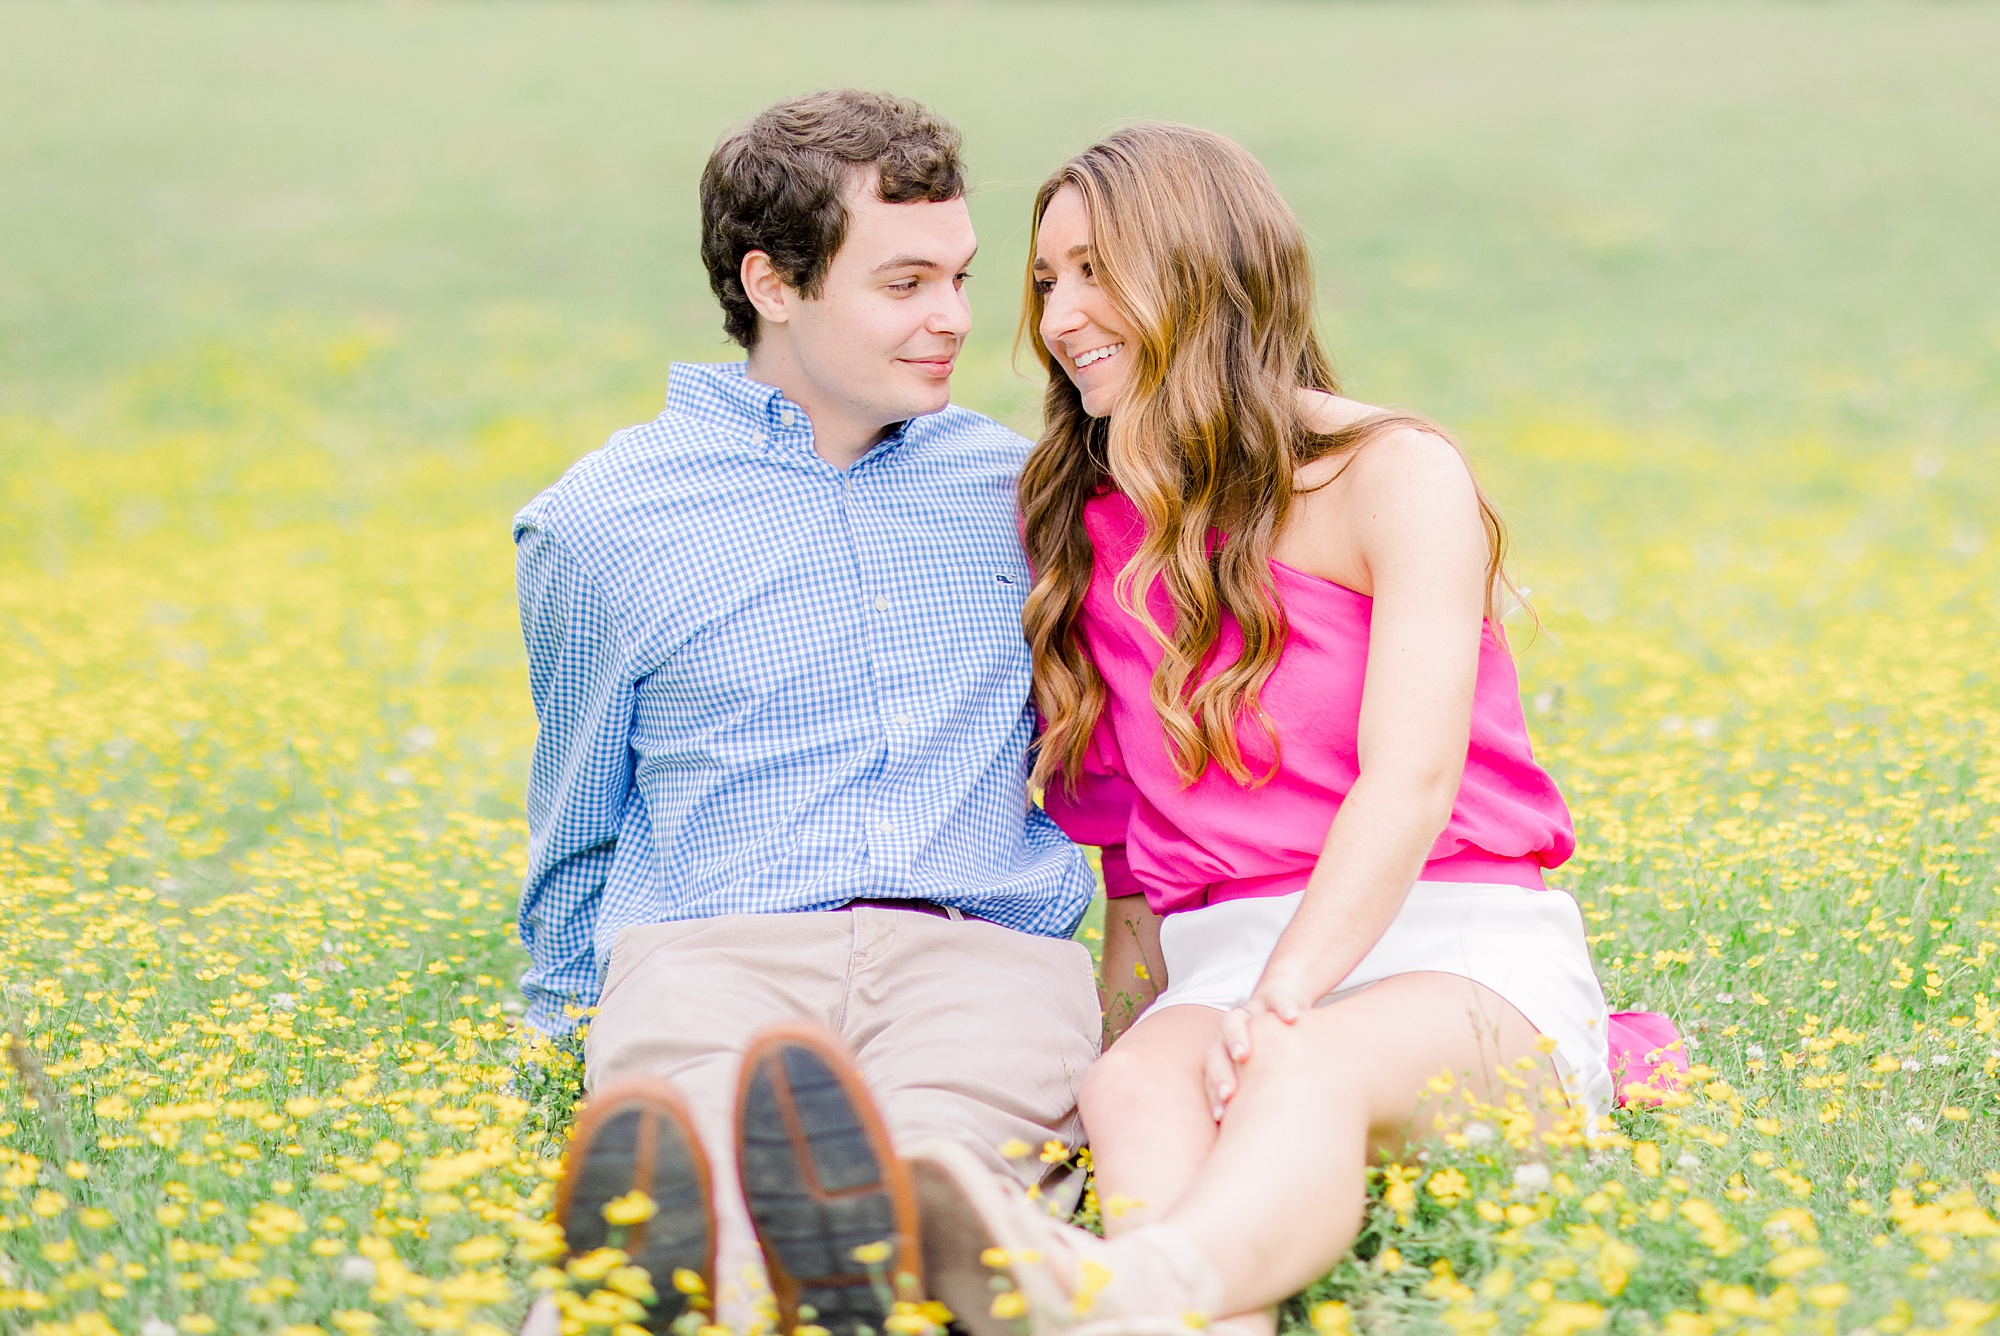 engaged couple sits together in field with yellow flowers